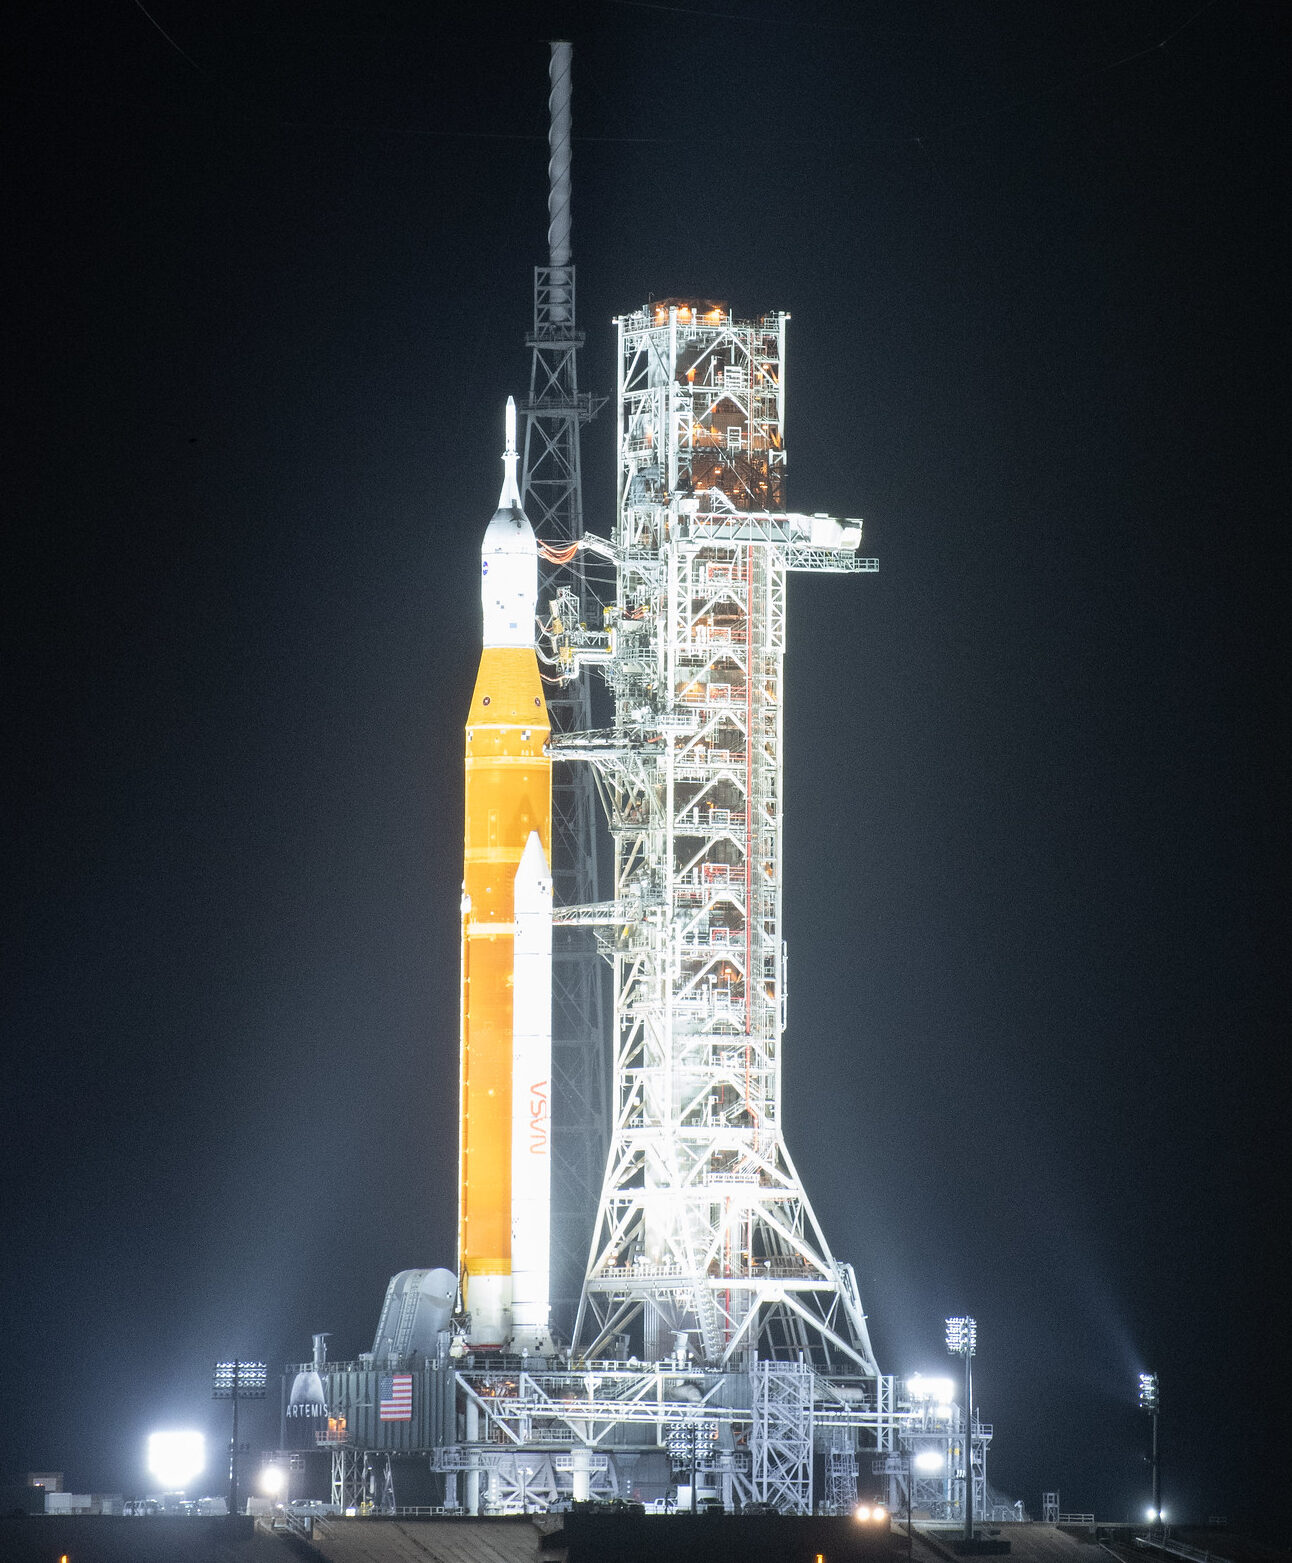 Specialized lighting that can withstand high temperatures and pressure lights up NASA's Artemis I spacecraft as it sits on the launchpad and prepares for launch 